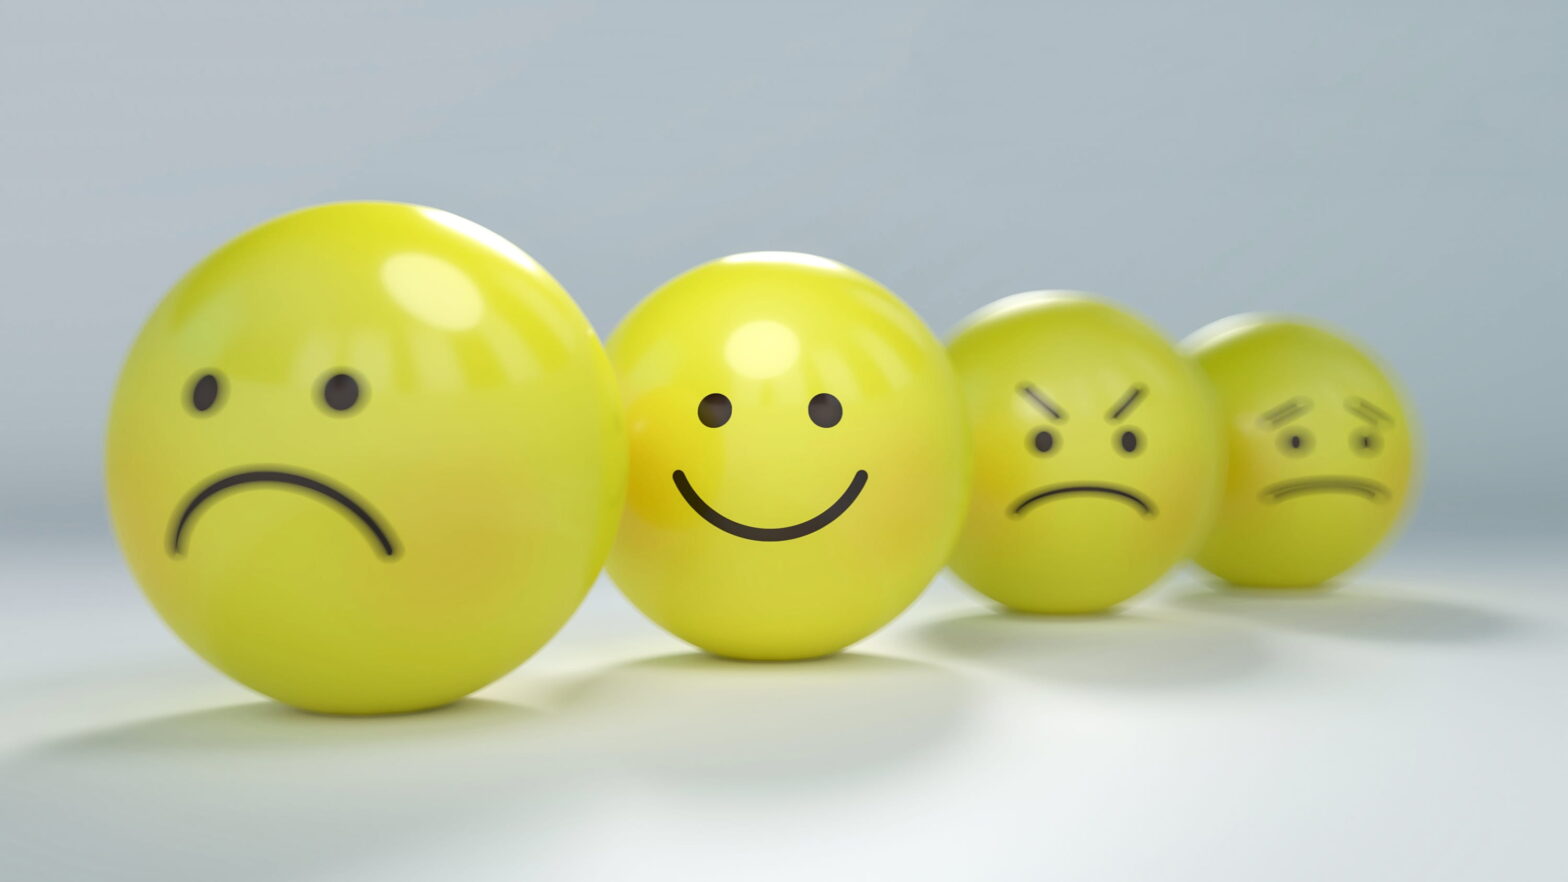 four yellow balls with different emoji expressions penned onto them